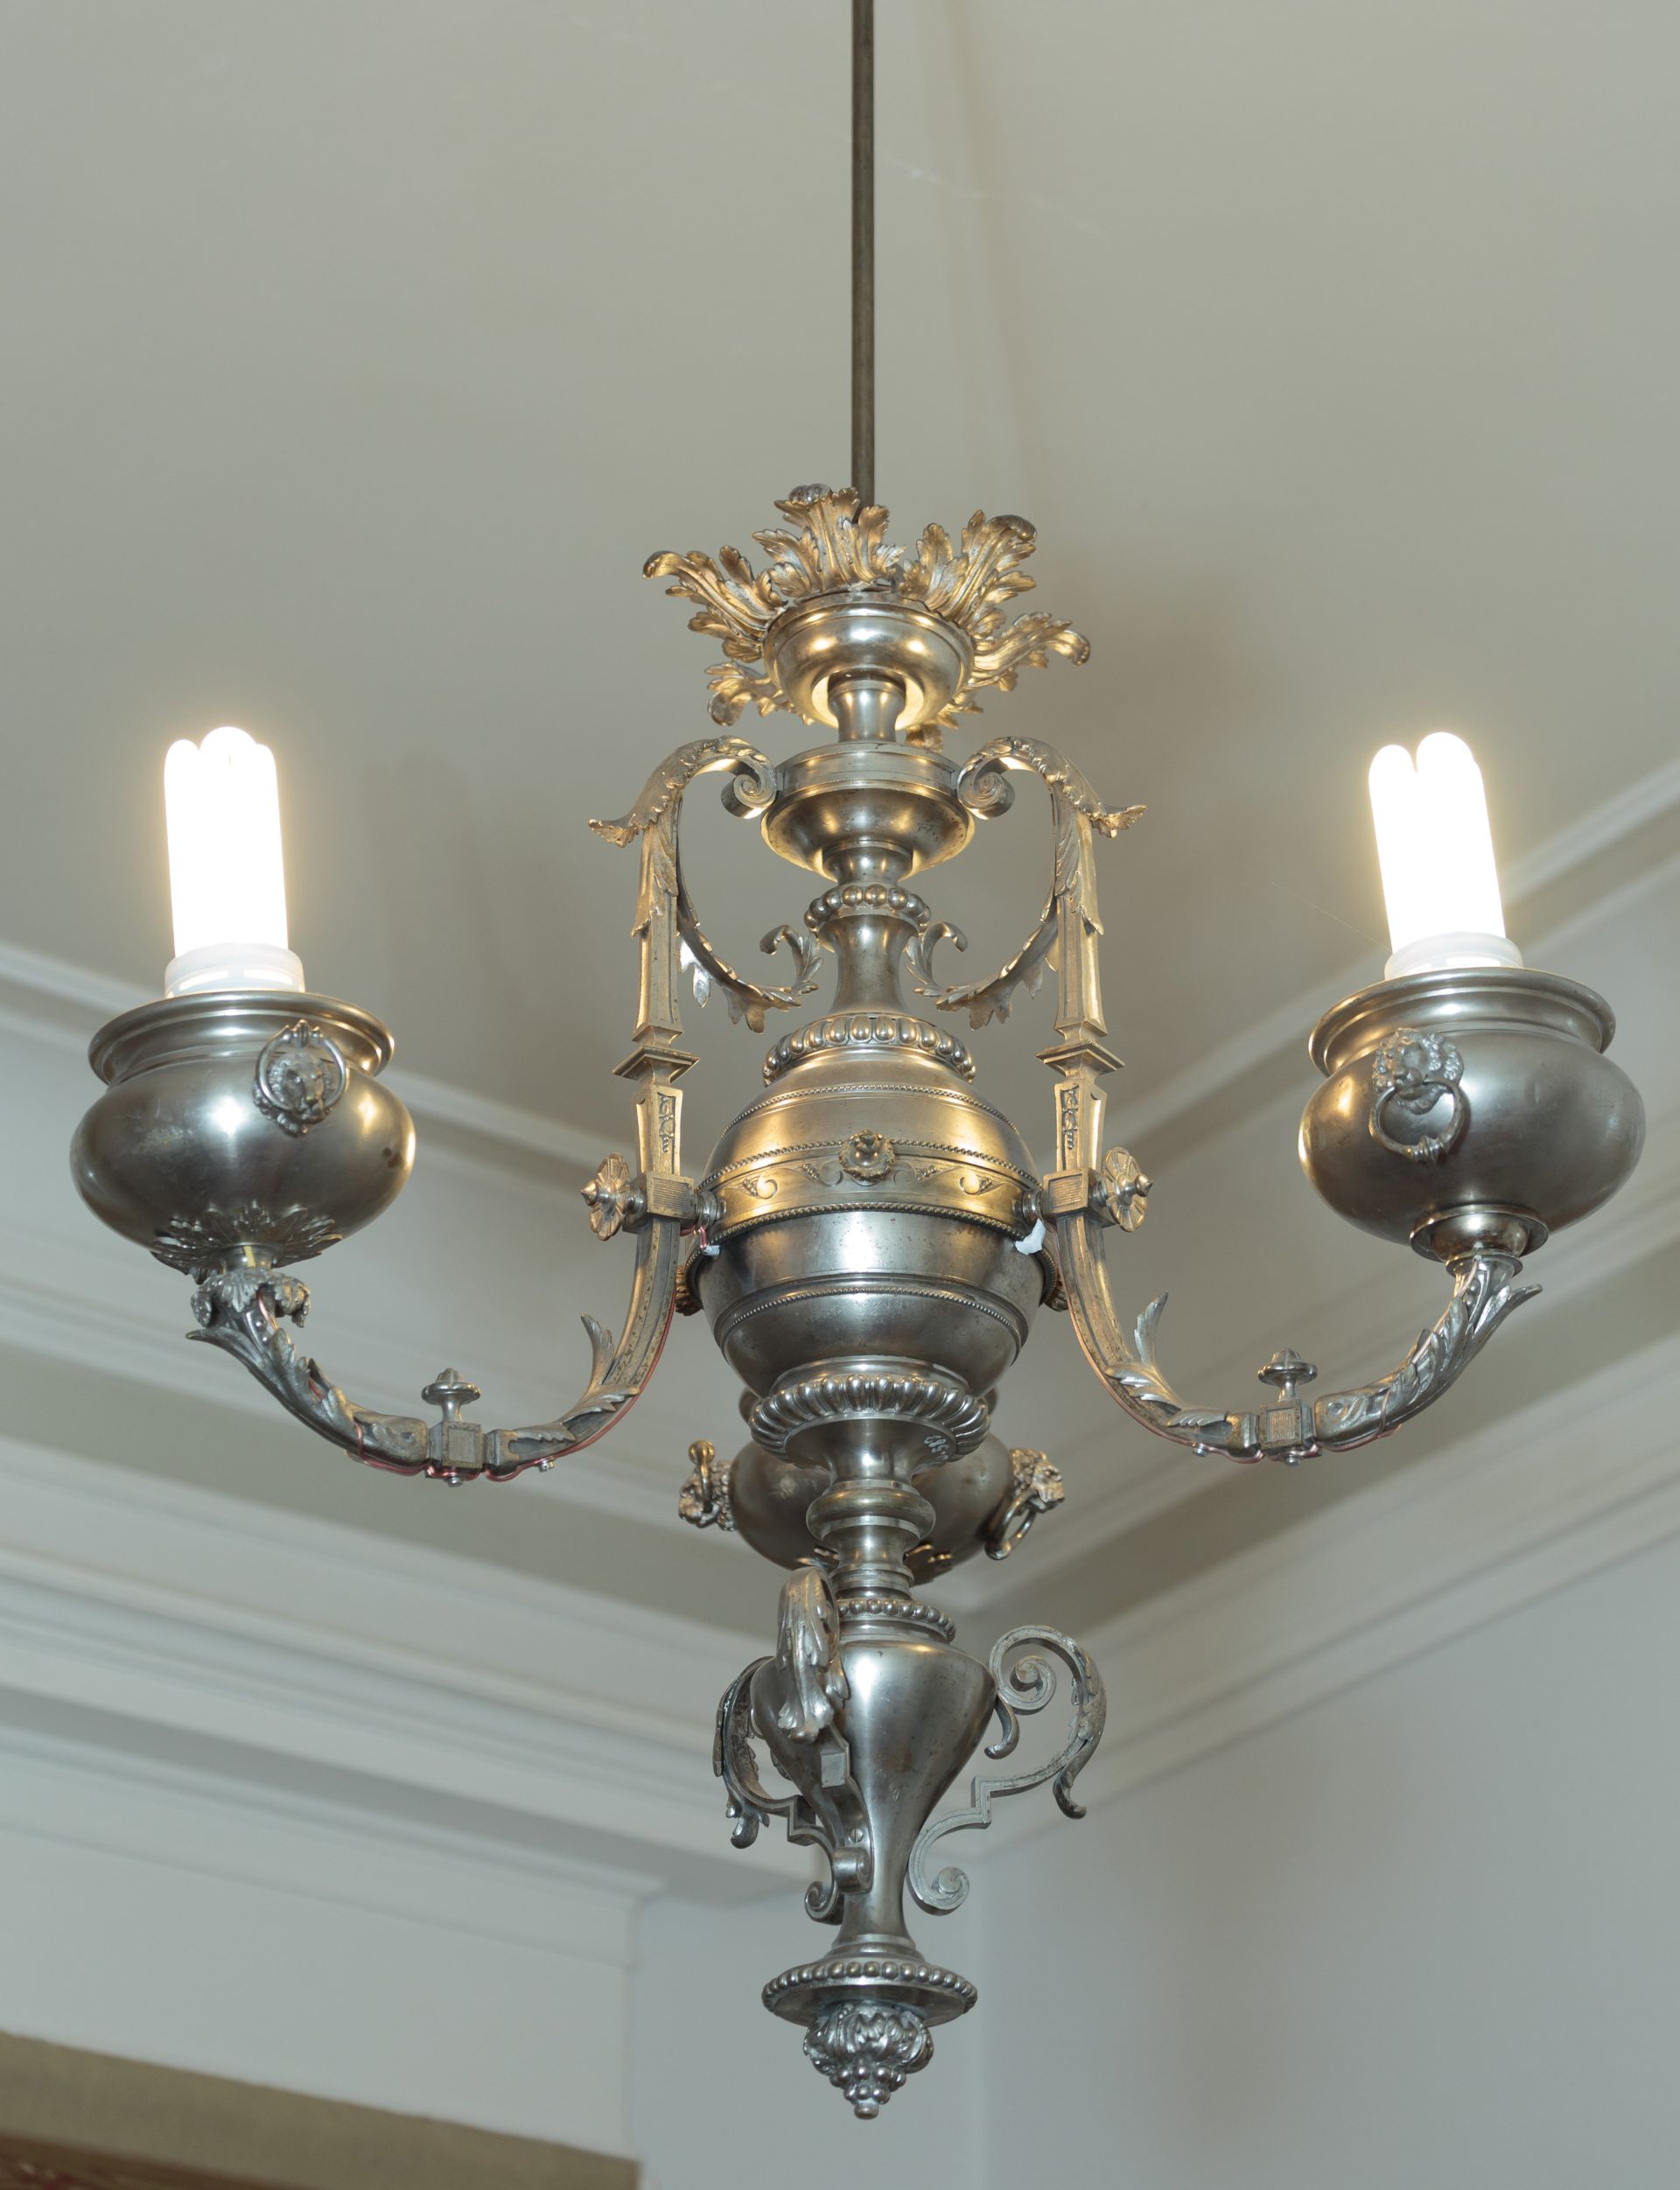 Chandelier, 1837–1899, Lithuanian National Museum of Art, TD-589. Photo by Tomas Kapočius, 2017